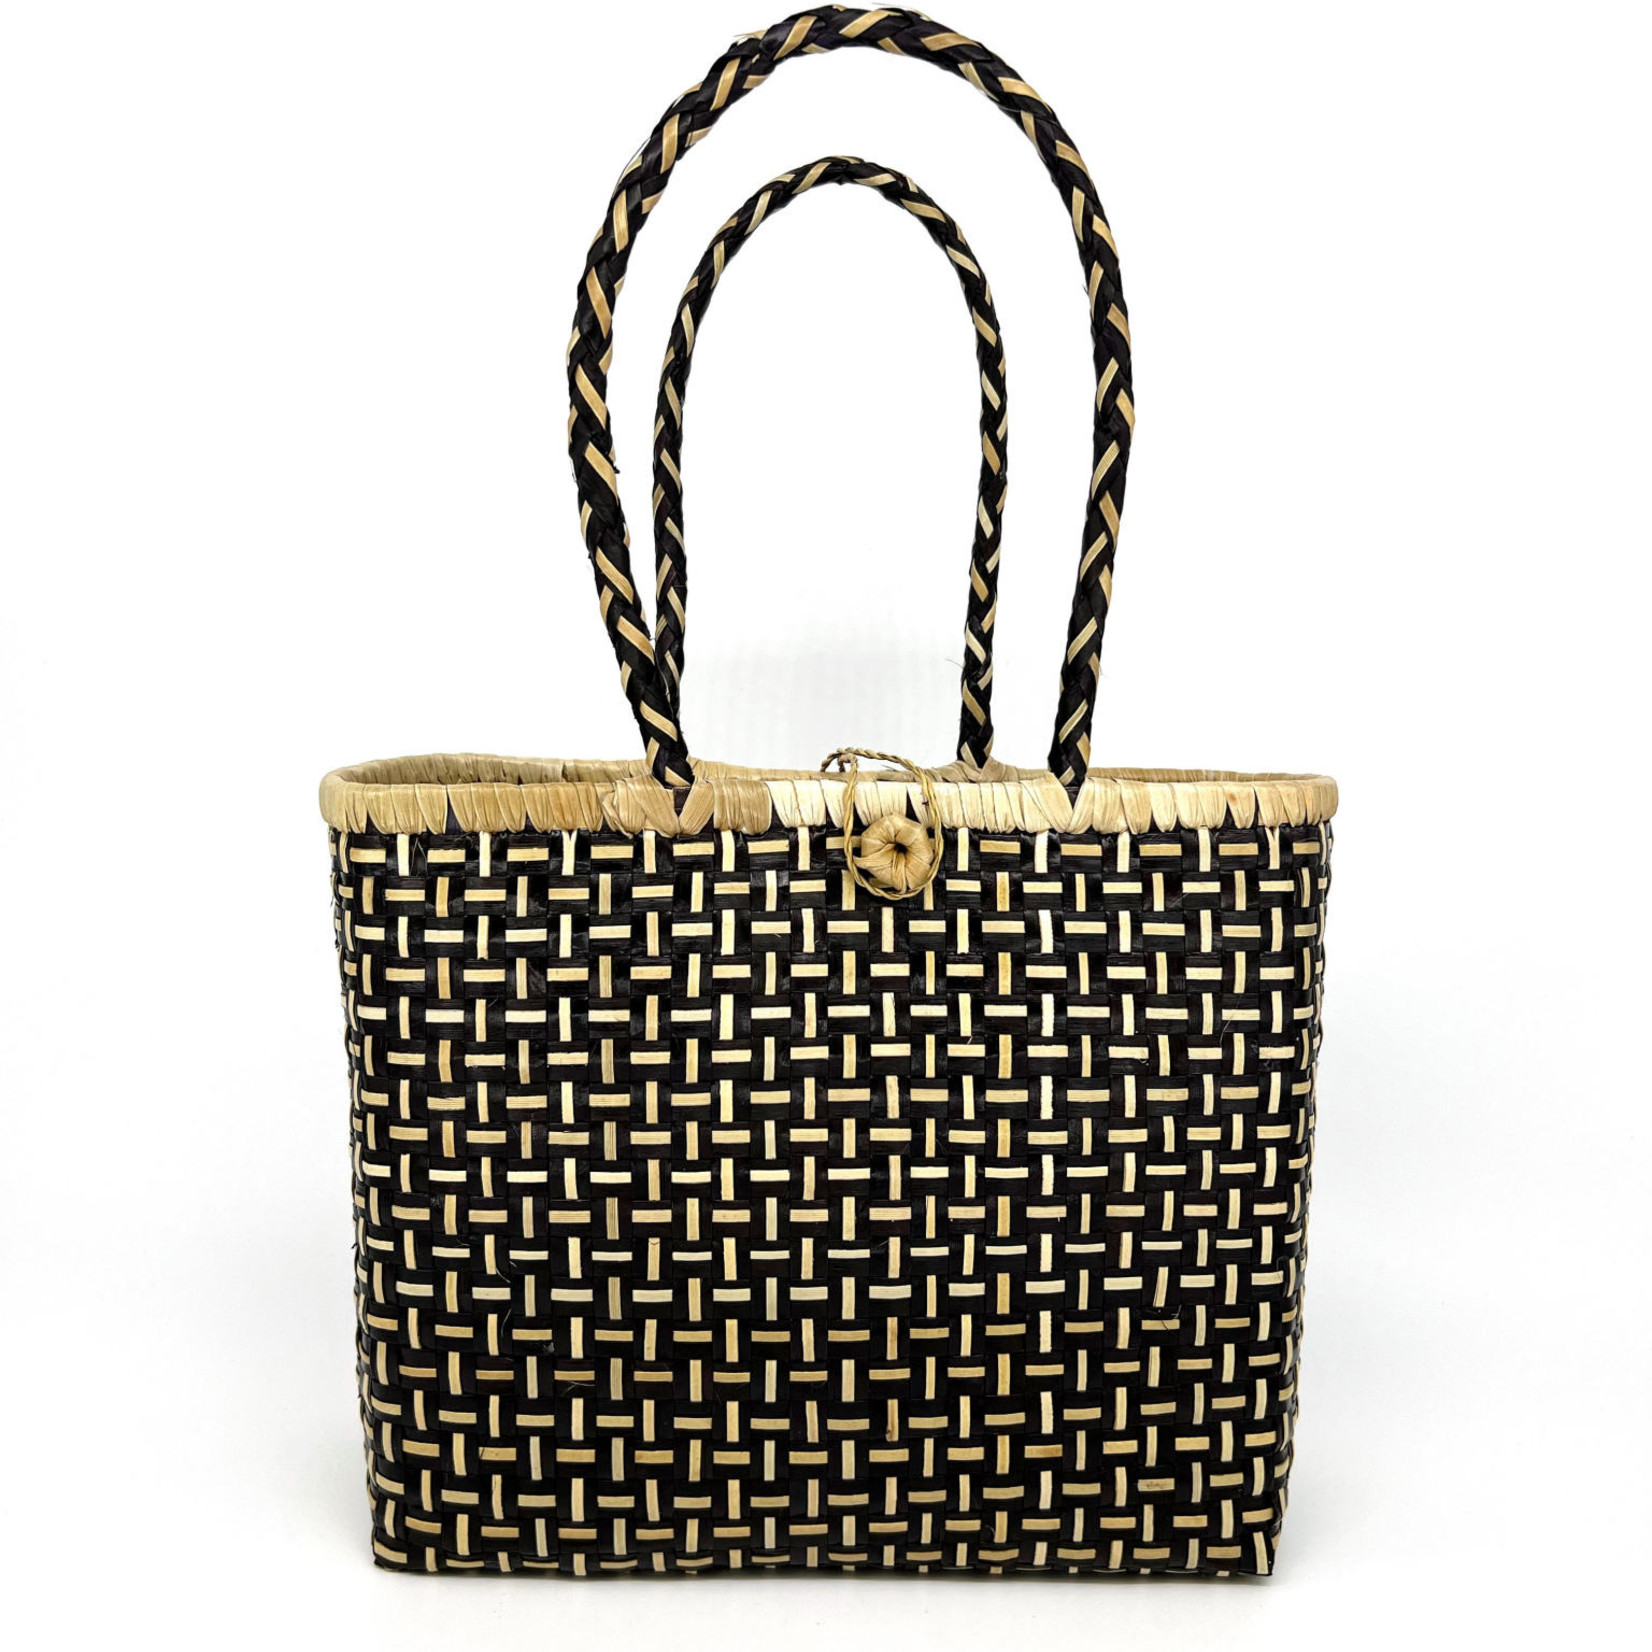 Two Tone Woven Lauhala Hula Bag Black *AVAILABLE IN 4 SIZES*